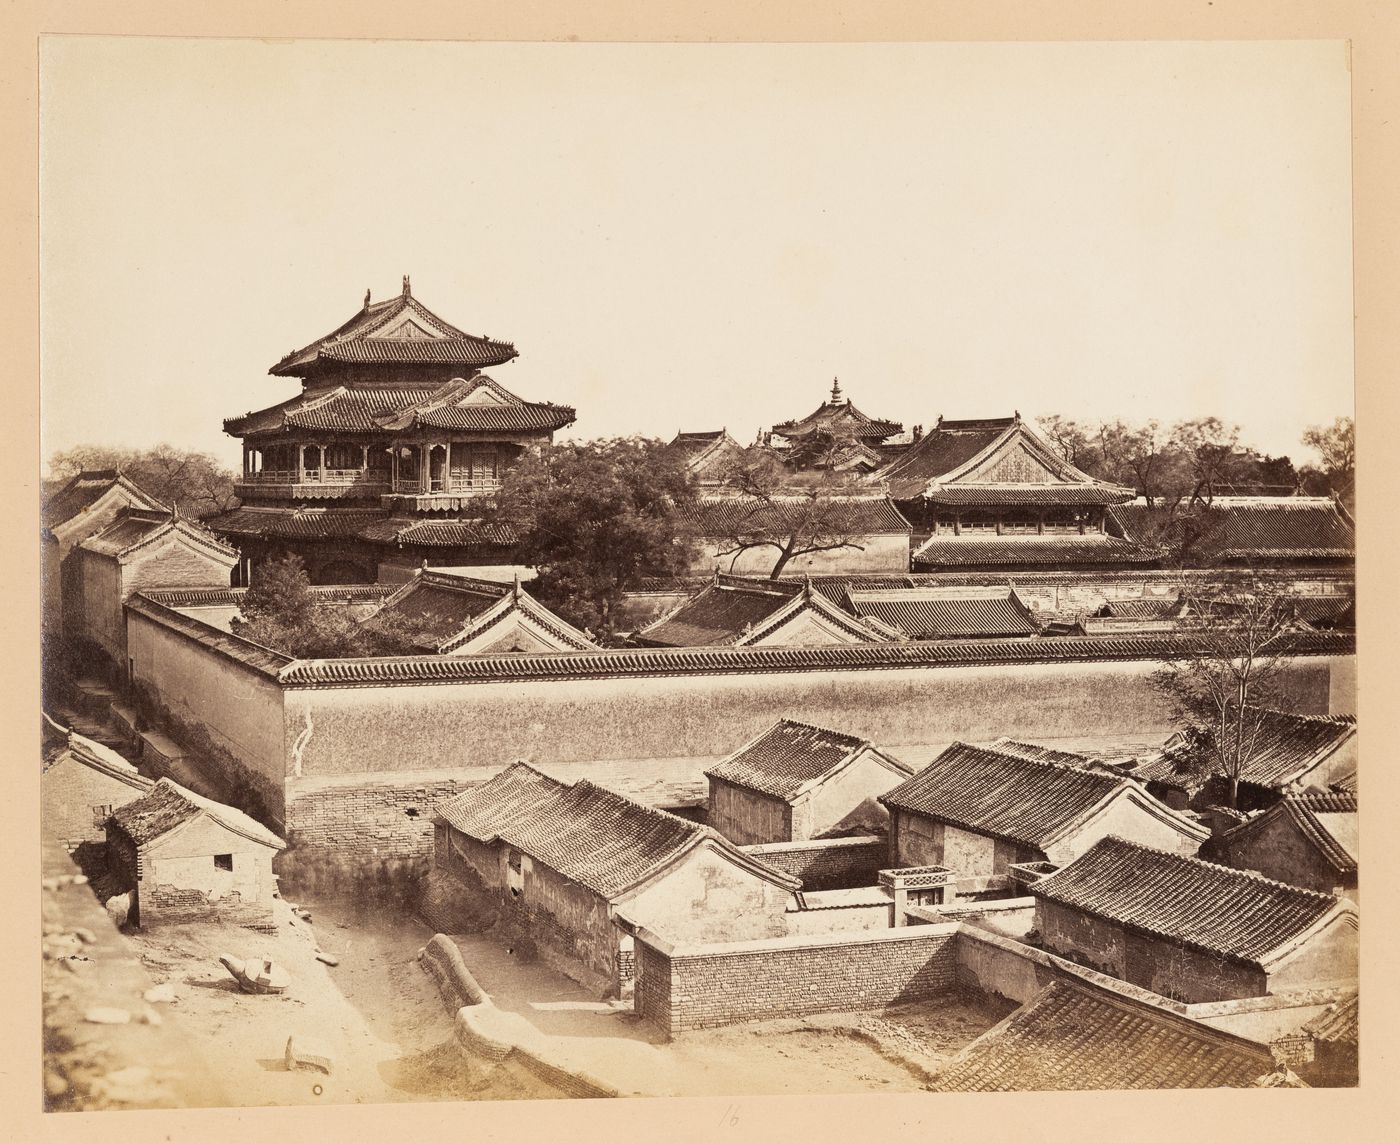 View of the Yonghe Gong [Lamasery of Harmony and Peace] (also known as the Lama Temple) showing Wanfu Ge [Ten Thousand Blessings Hall] and other buildings, Peking (now Beijing), China